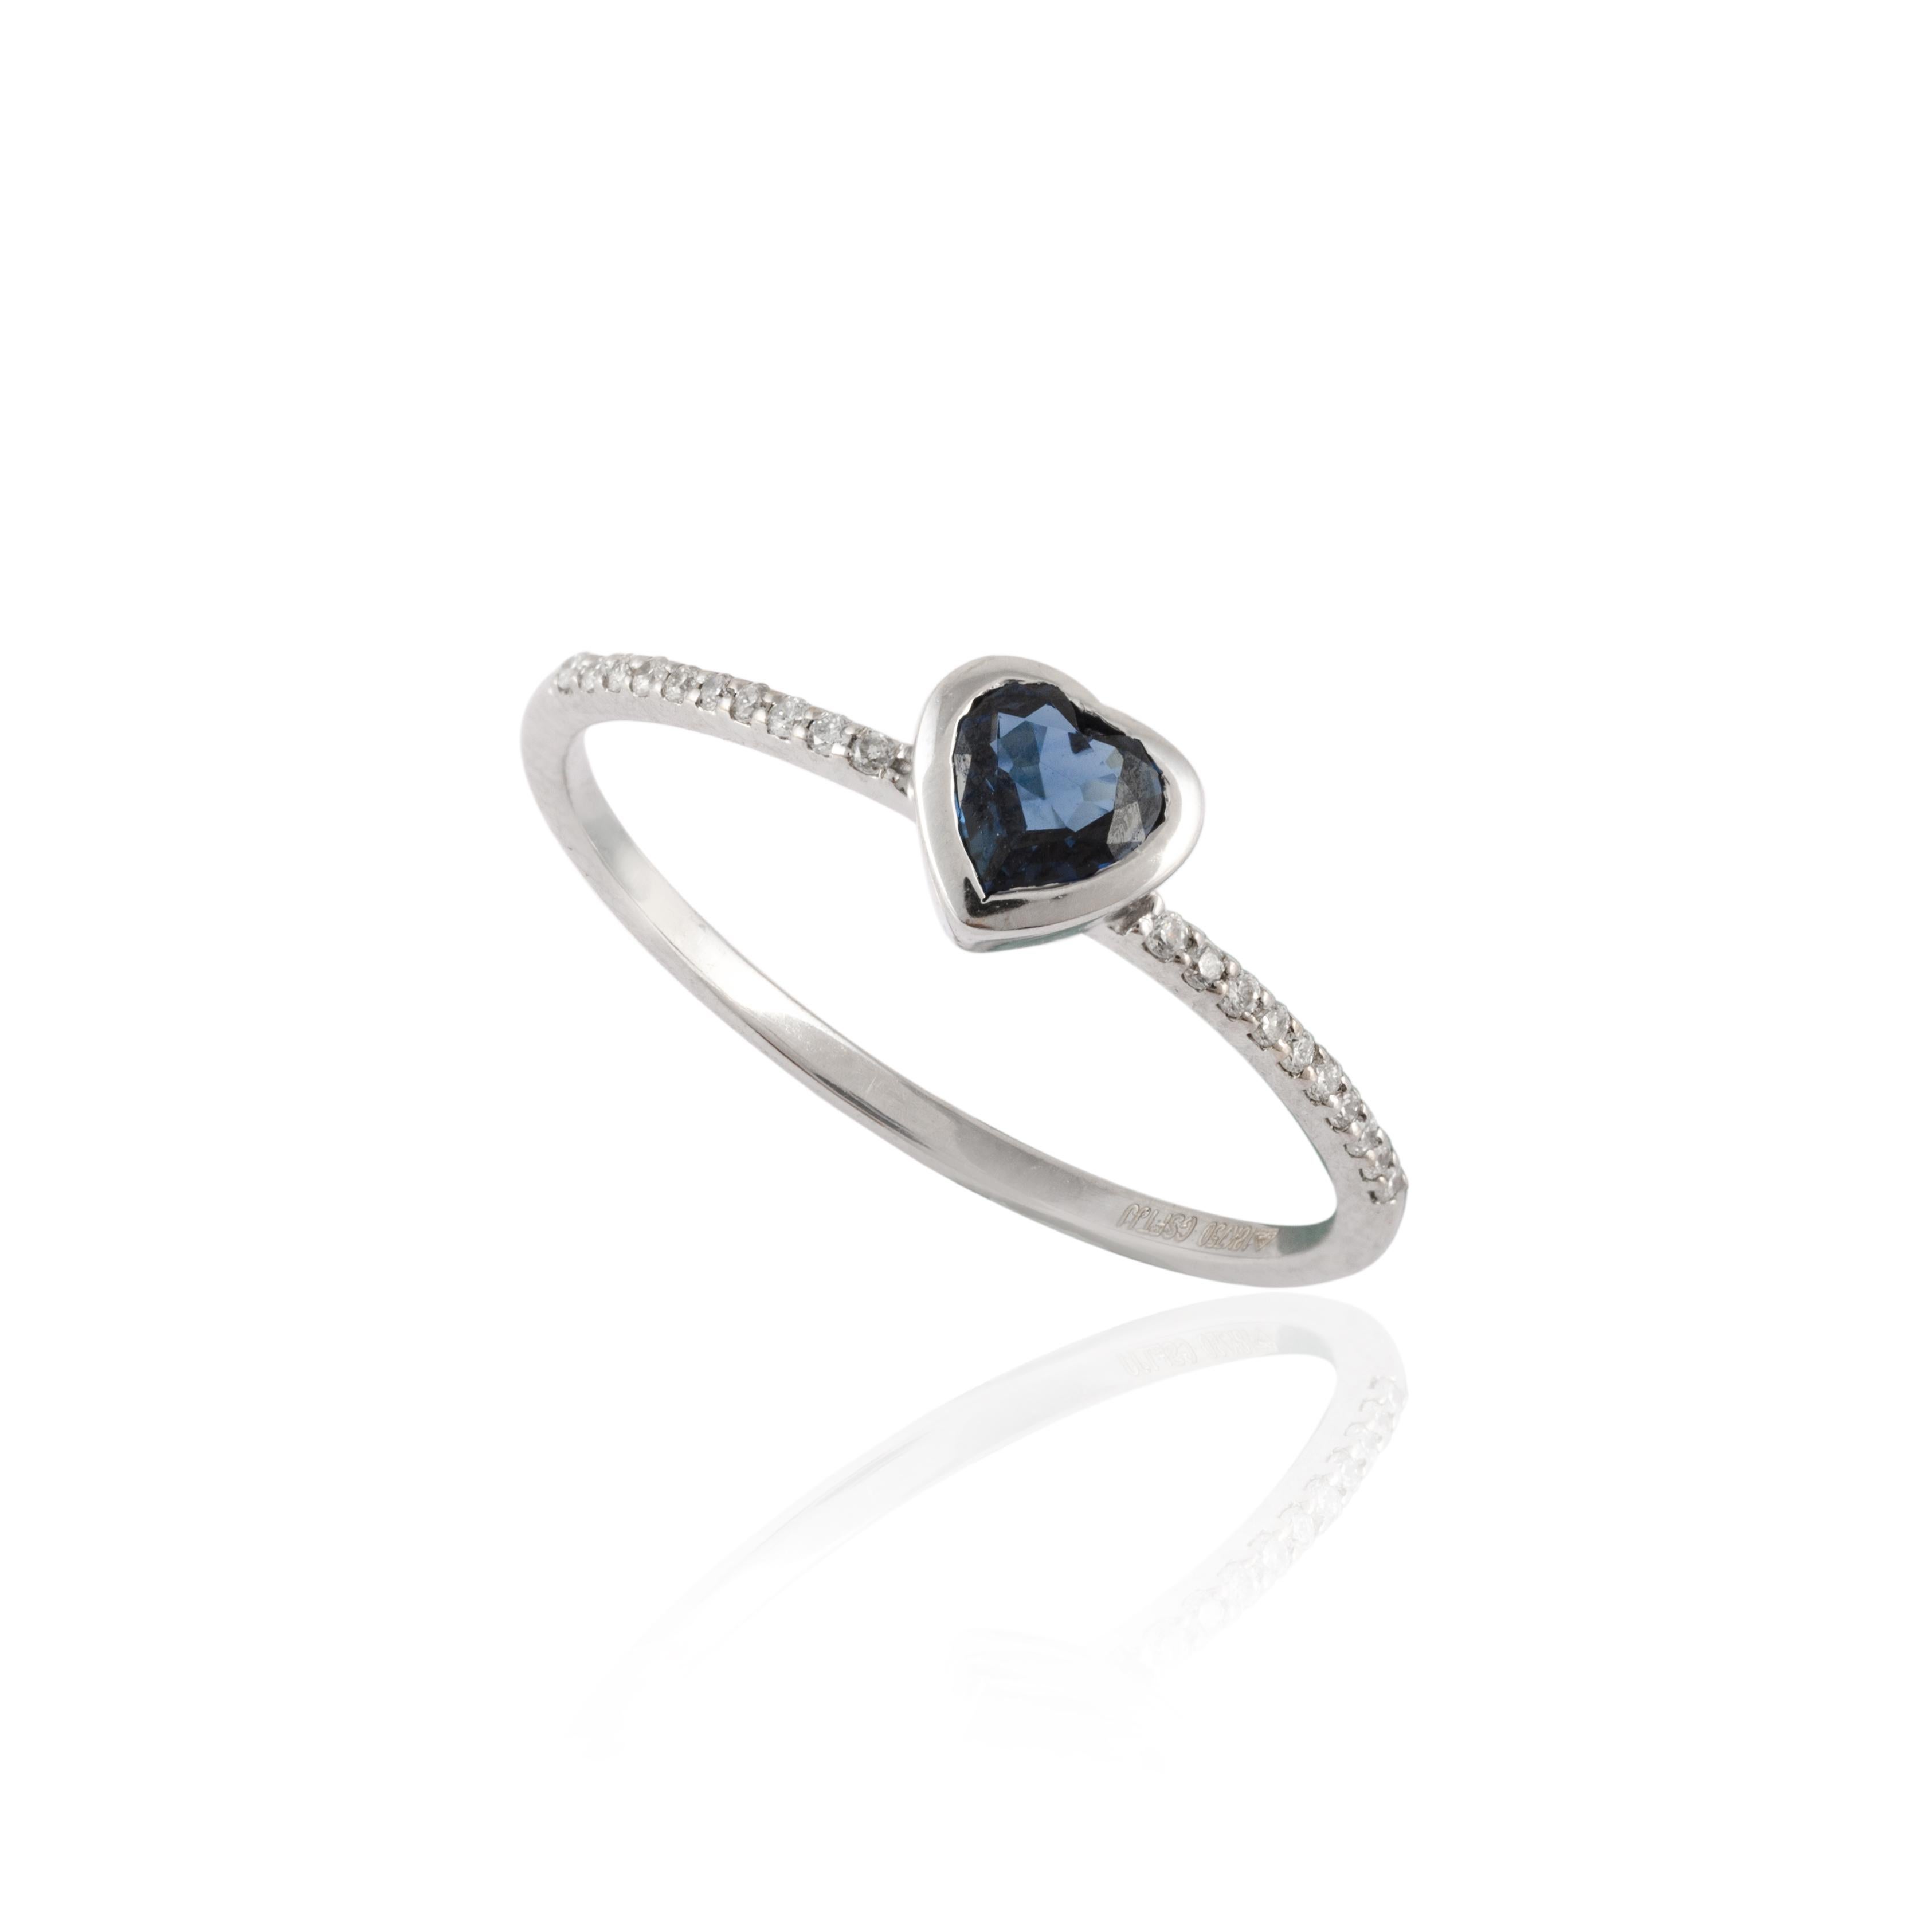 For Sale:  18 Karat Solid White Gold Dainty Blue Sapphire Heart Promise Ring with Diamonds 8